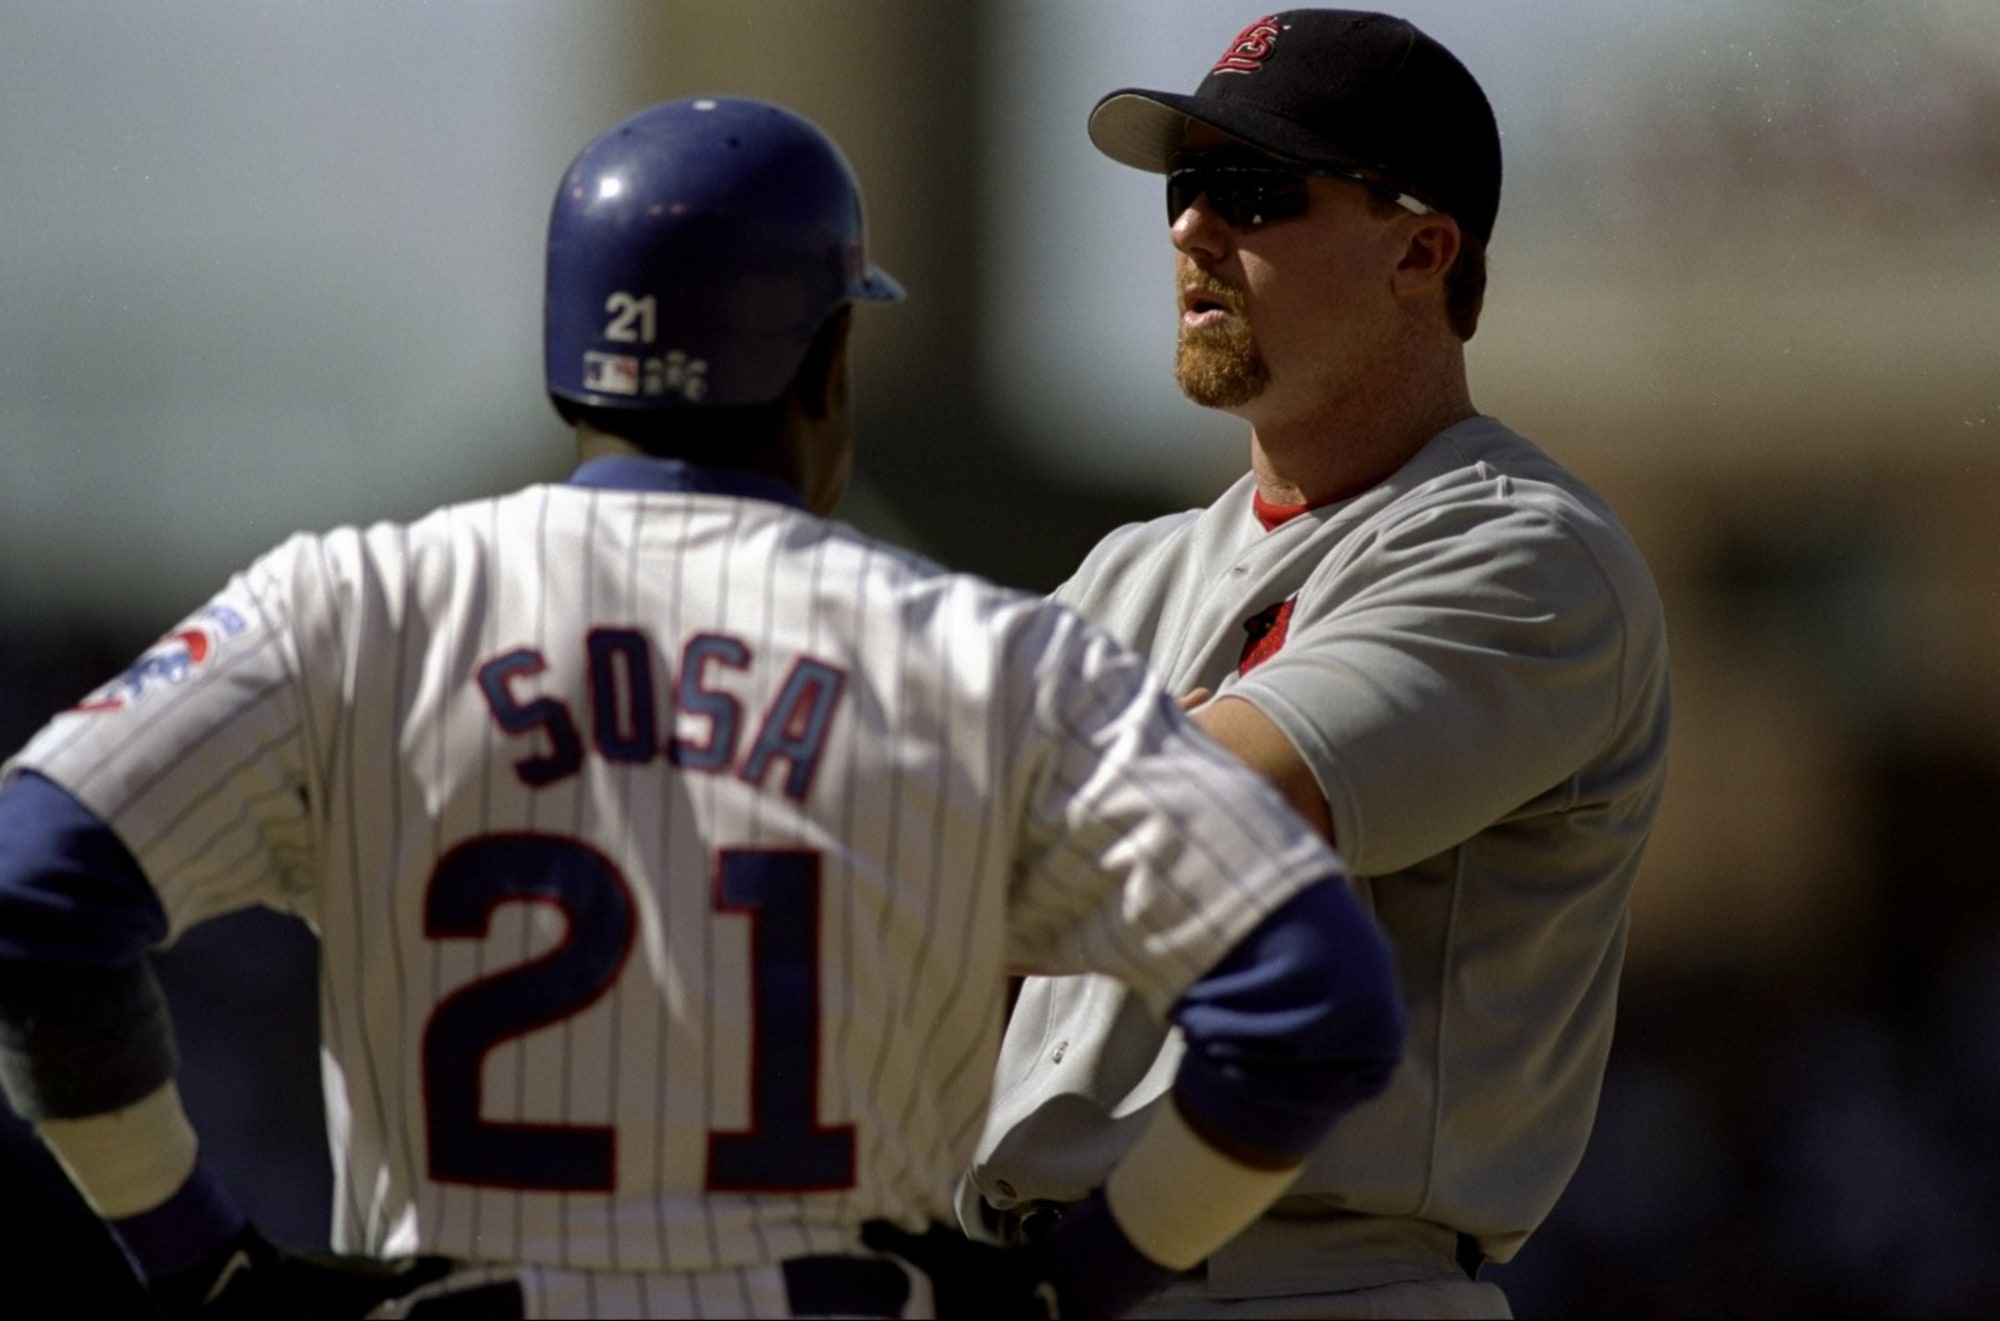 St. Louis Cardinals'' Mark McGwire and Chicago Cubs'' Sammy Sosa